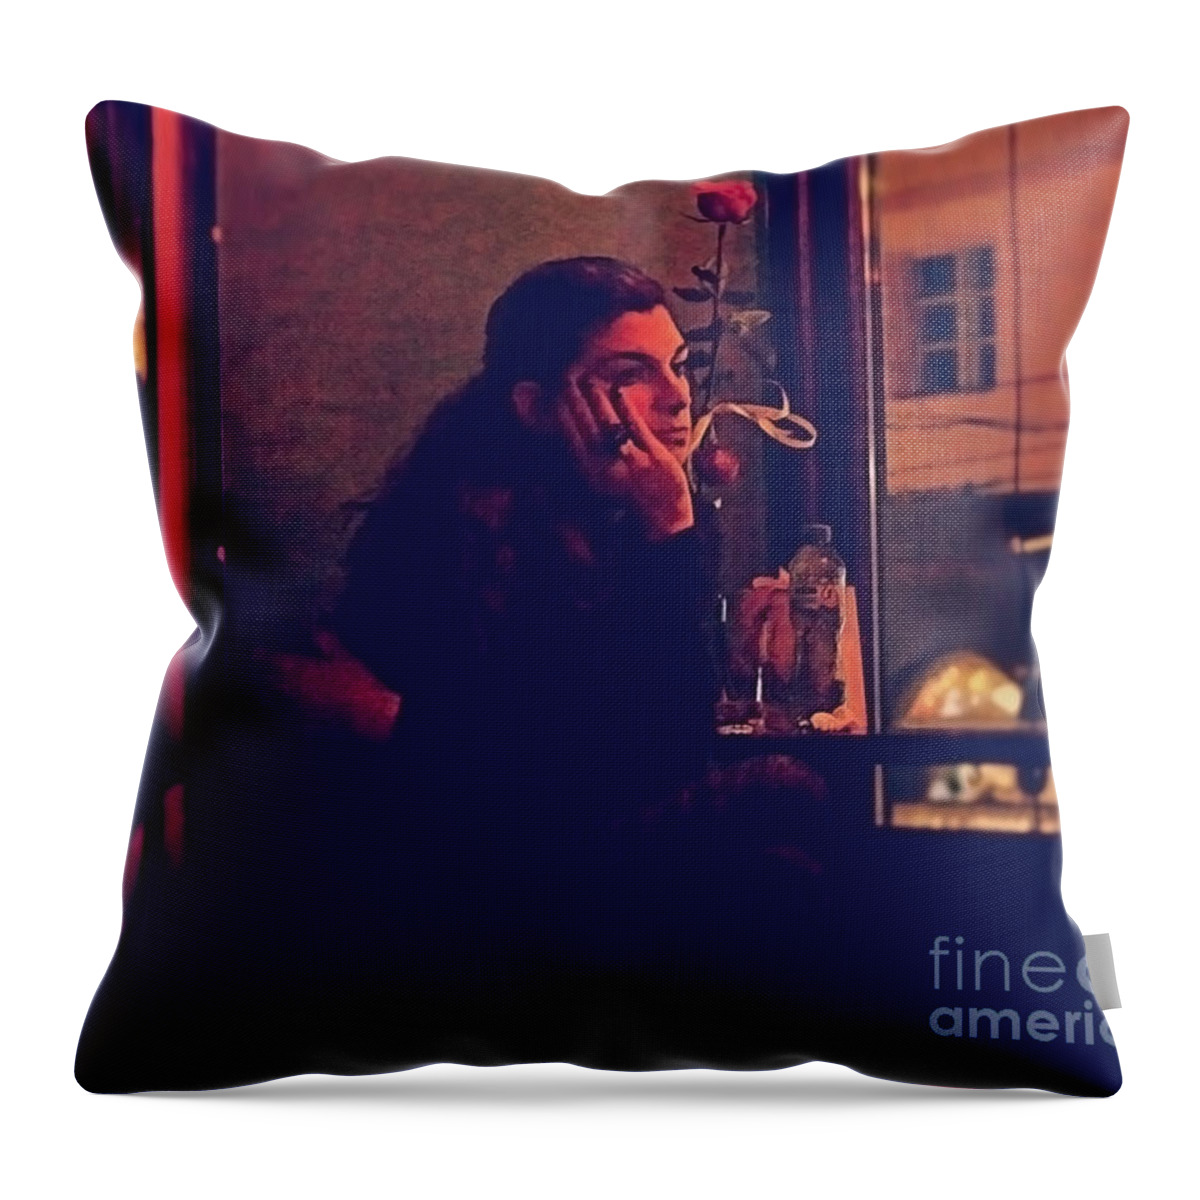 Girl Throw Pillow featuring the digital art Blue rose in red night by Yavor Mihaylov